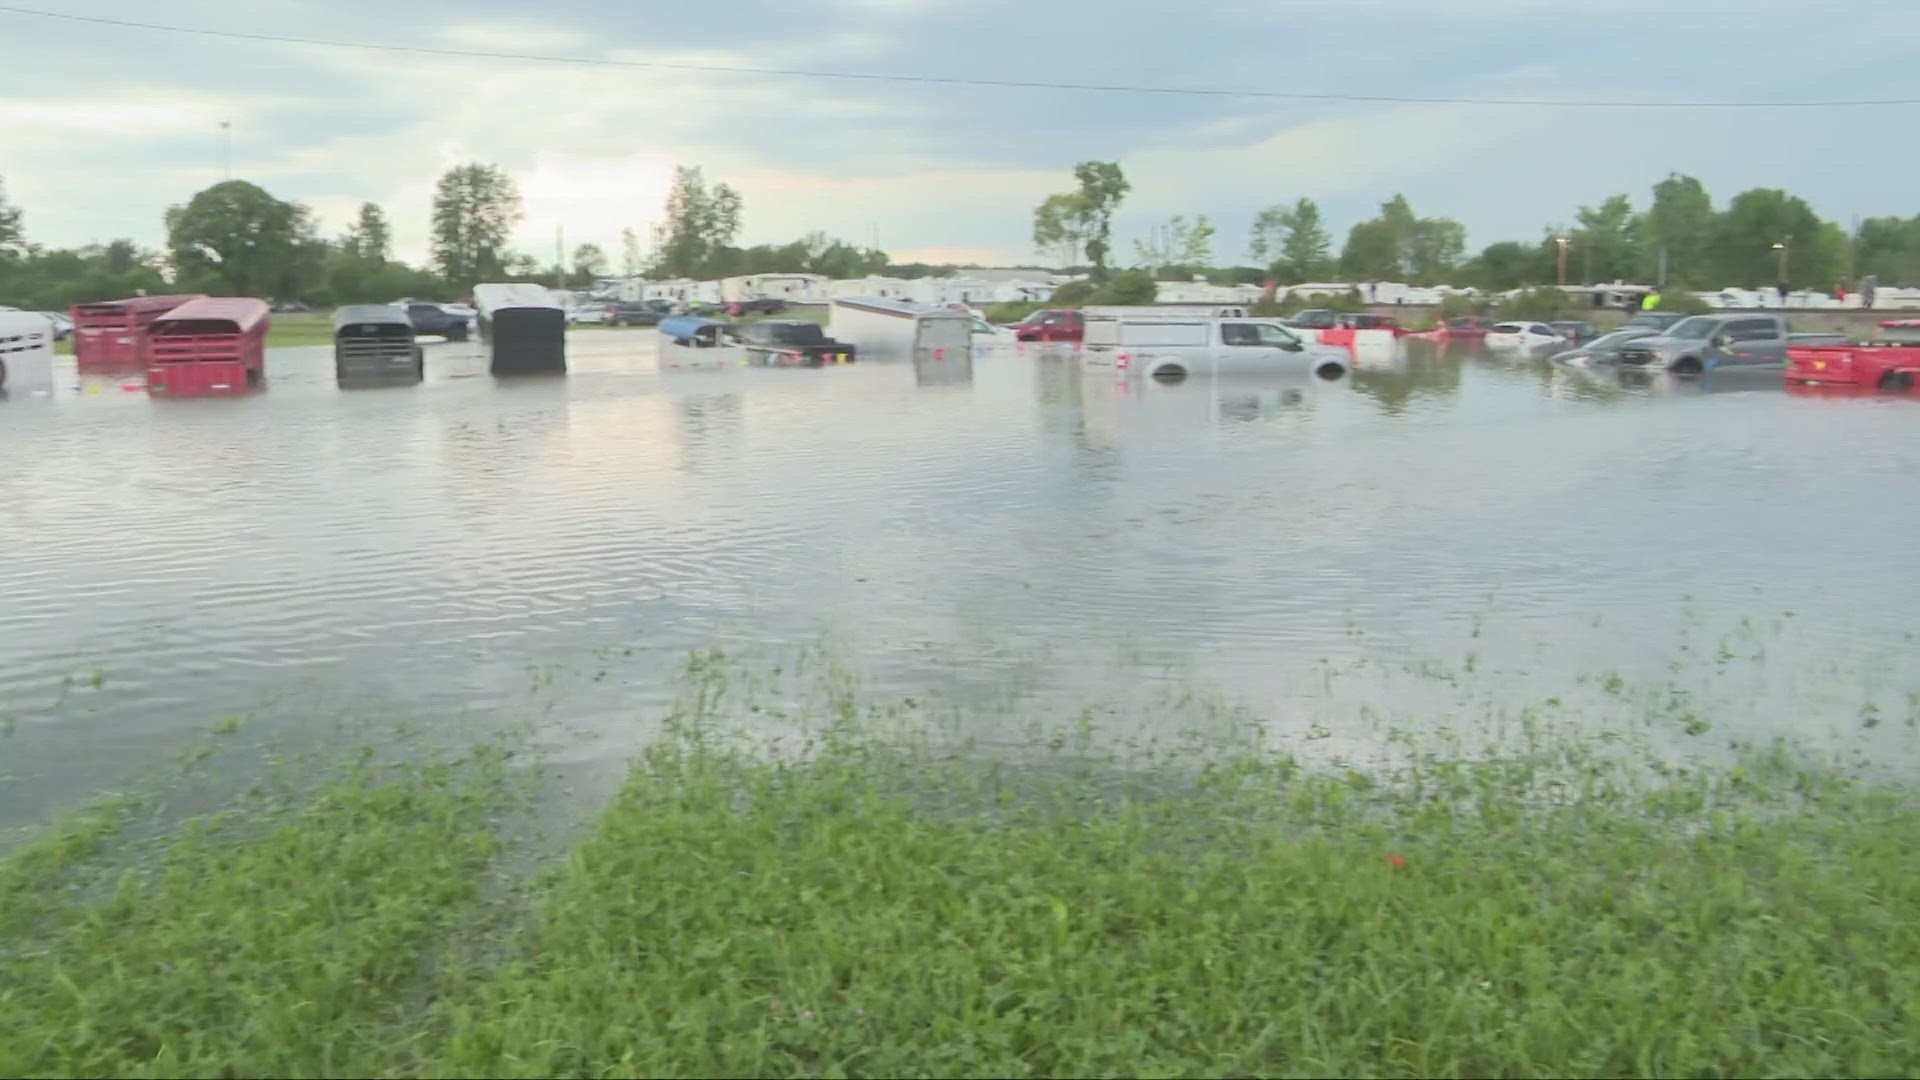 Lorain County Fair closed due to flooding and severe weather damage